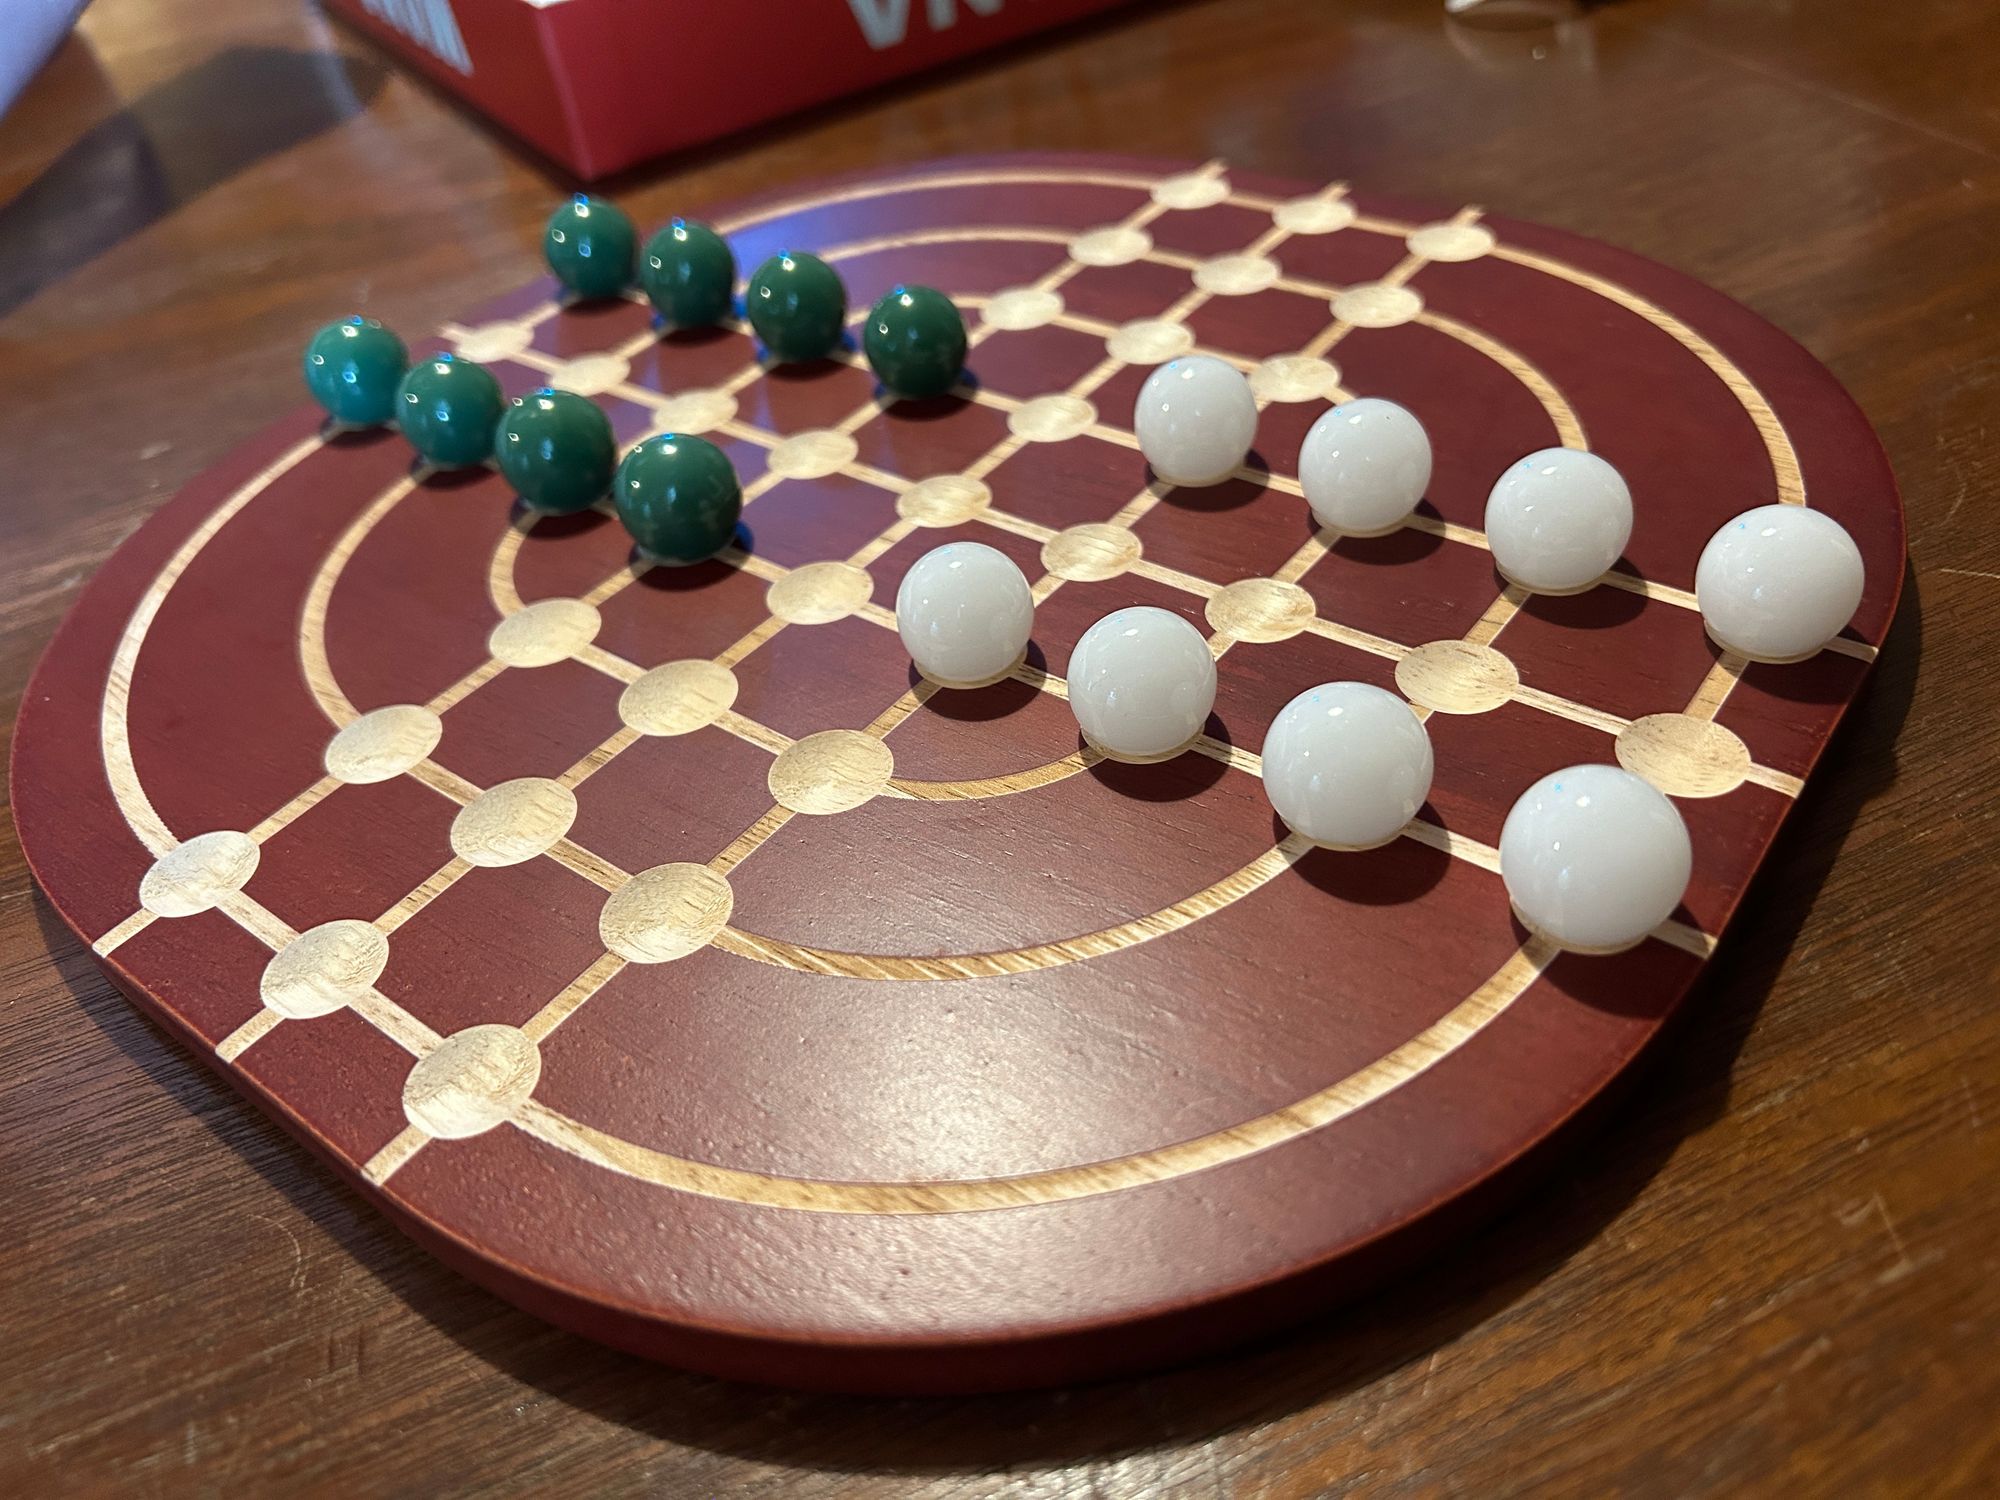 An image of a wooden board game with spherical pieces places in divots on the board.